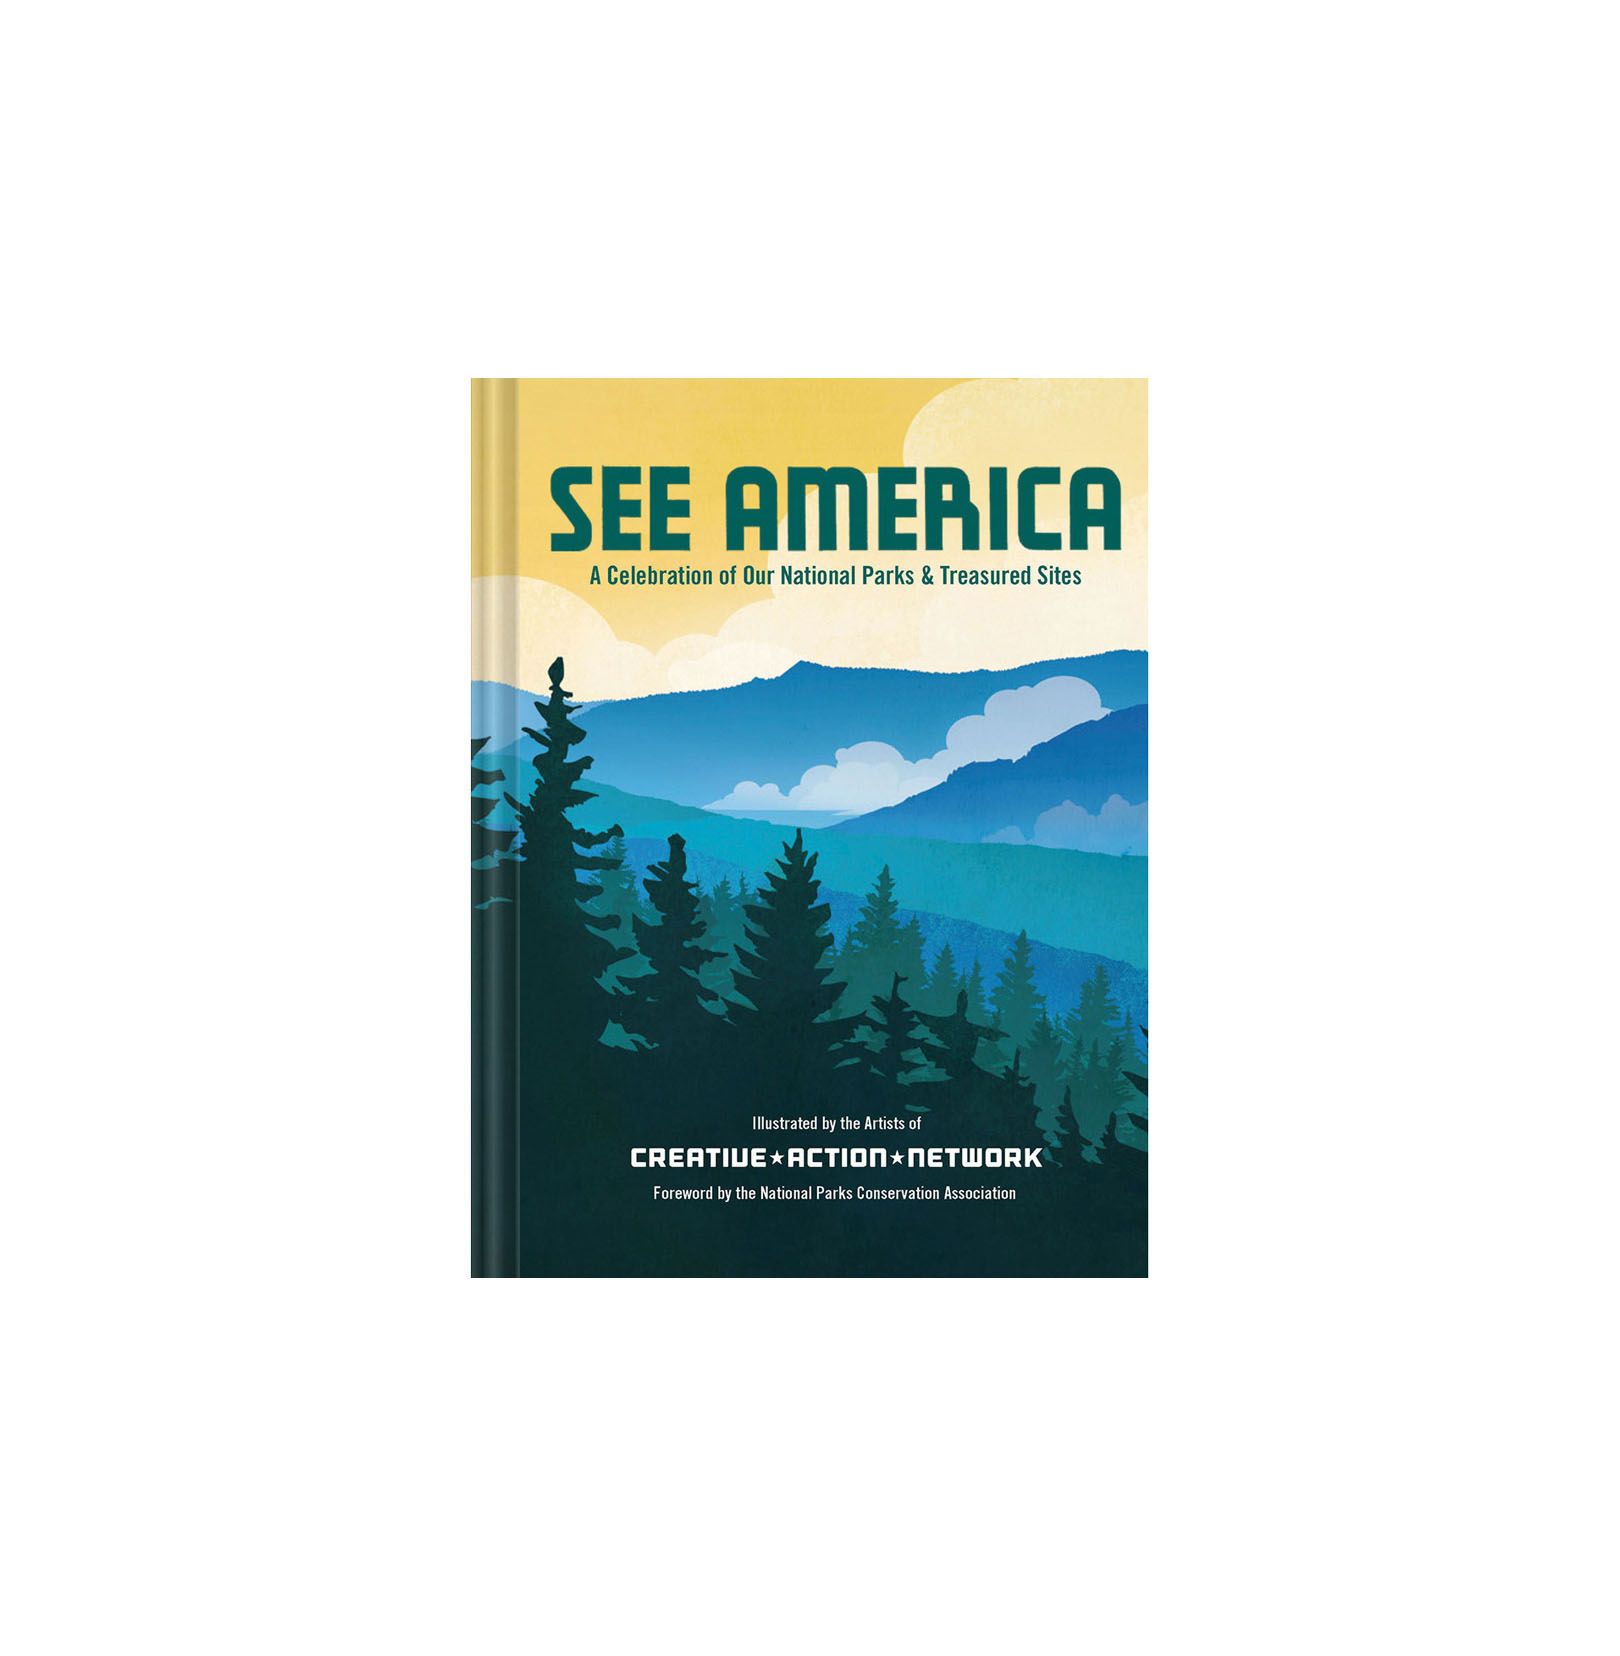 See America: A Celebration of Our National Parks & Treasured Sites, by the Creative Action Network